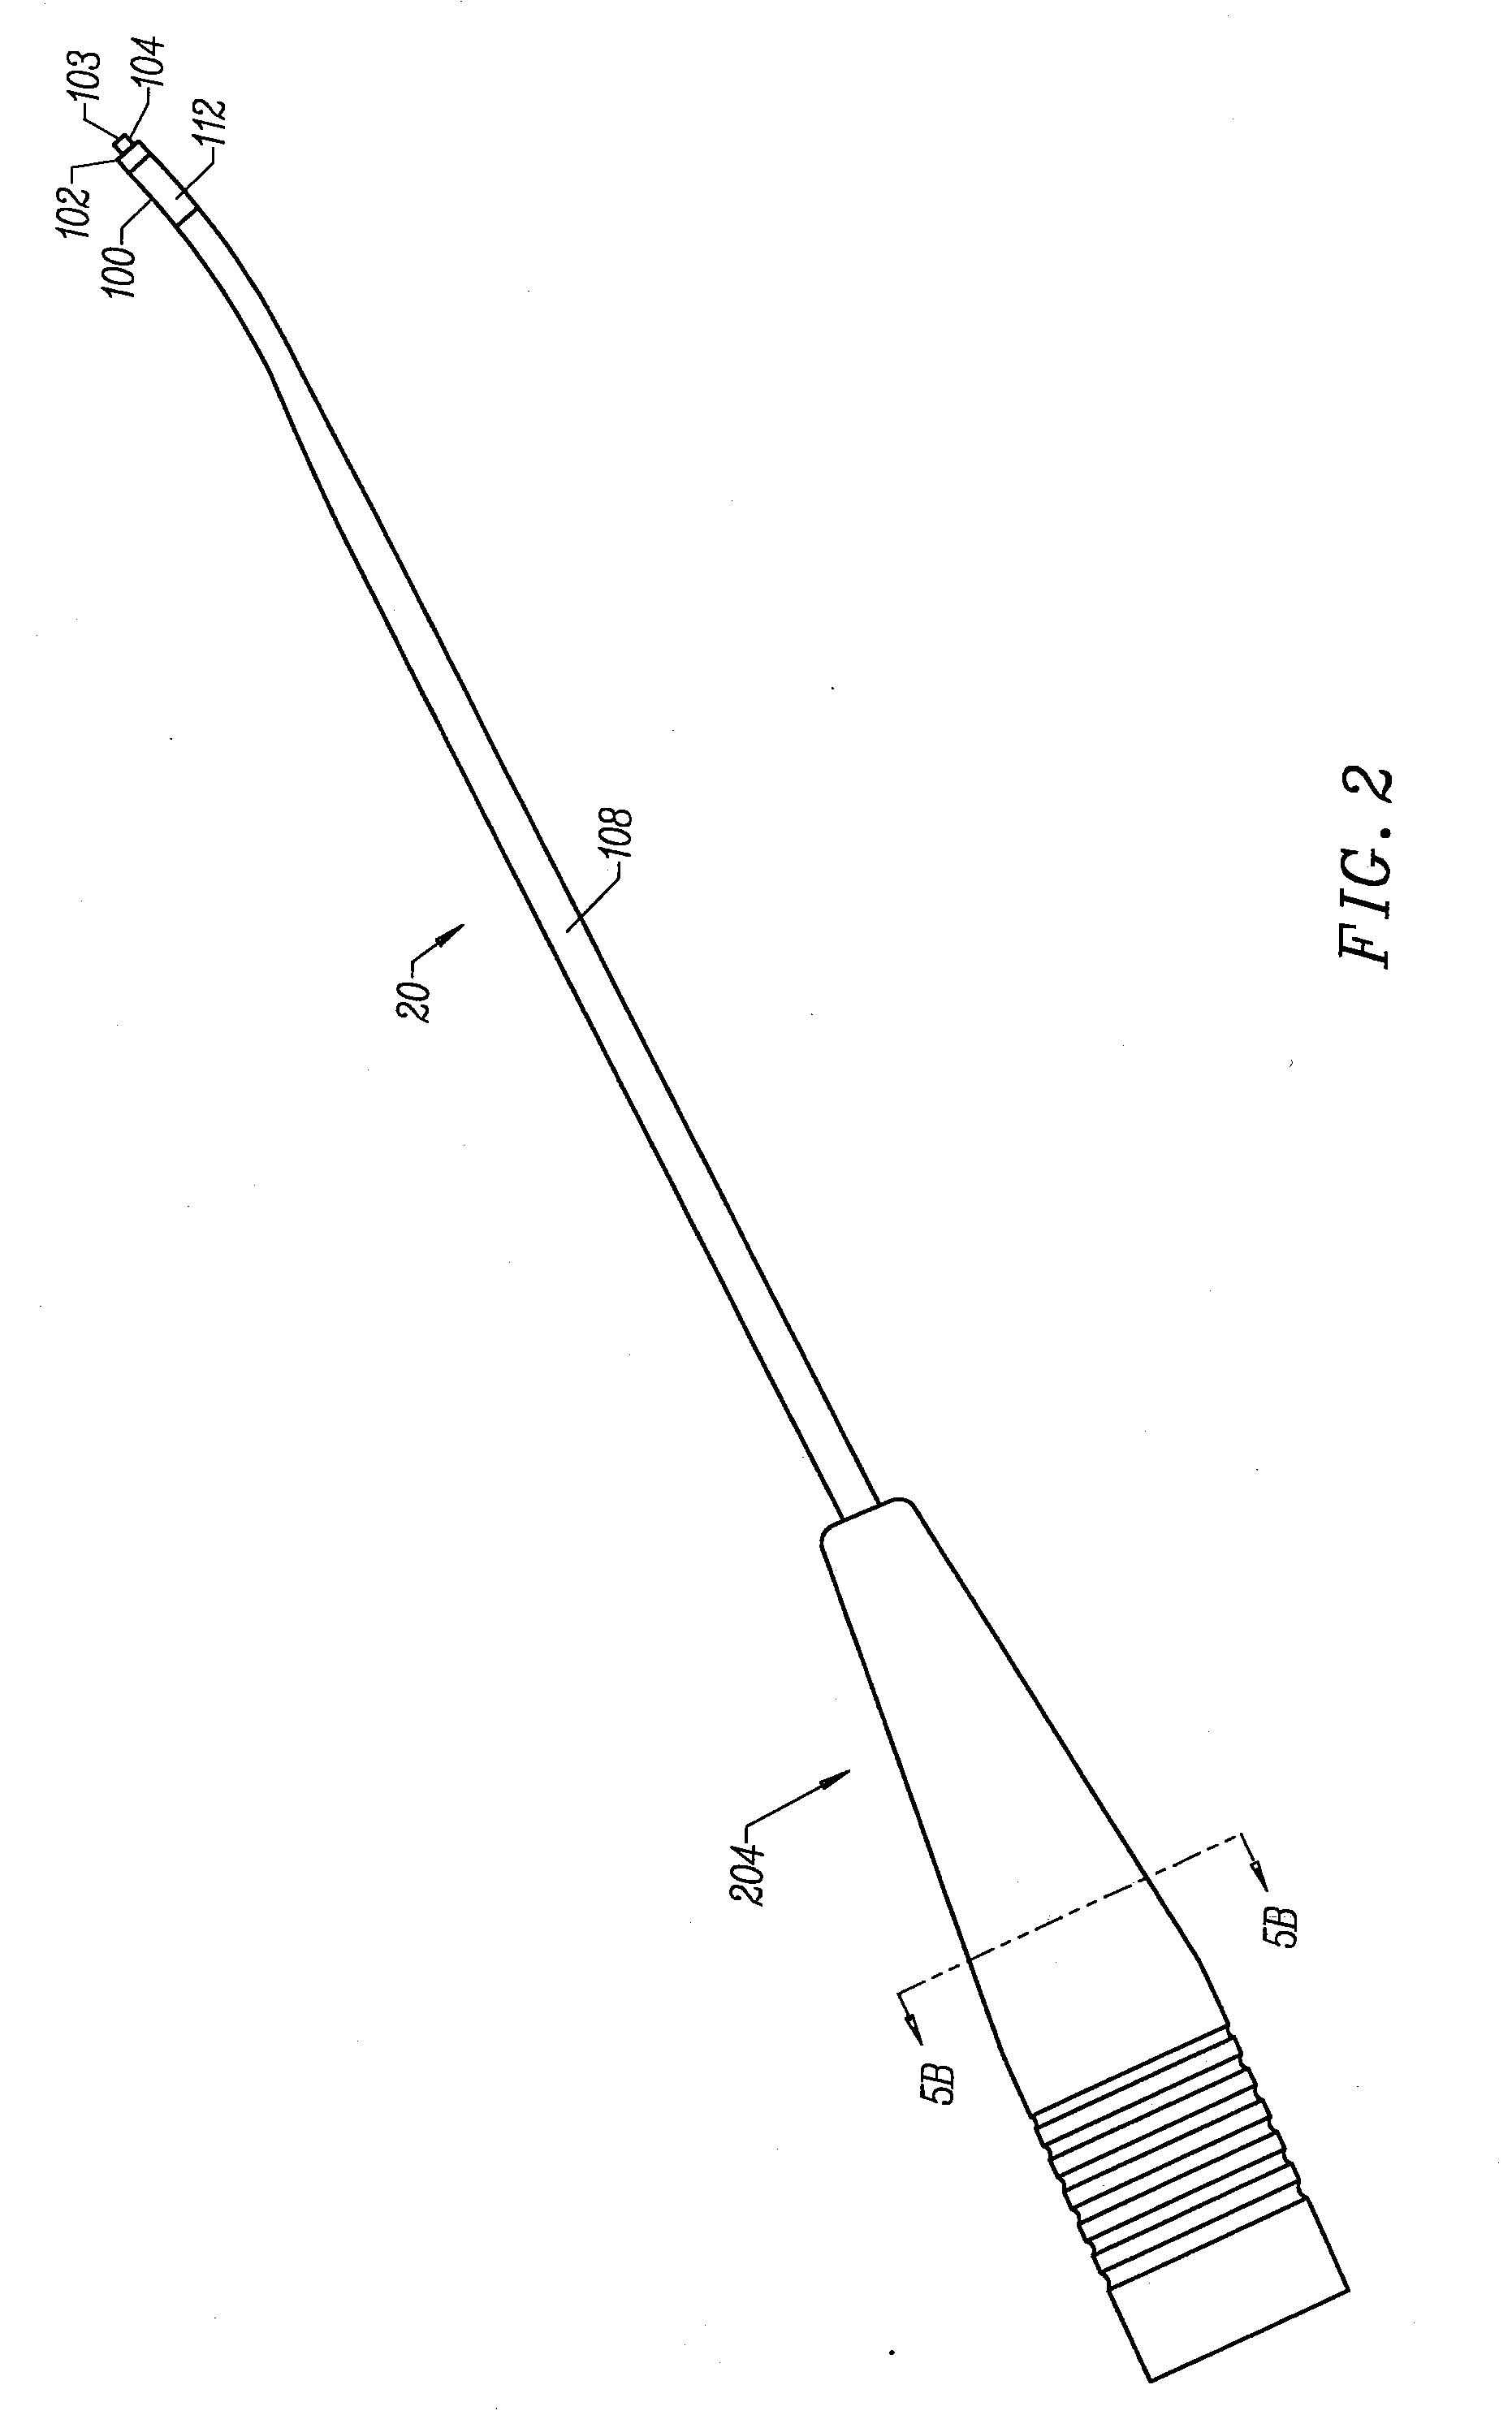 Electrosurgical apparatus and methods for ablating tissue